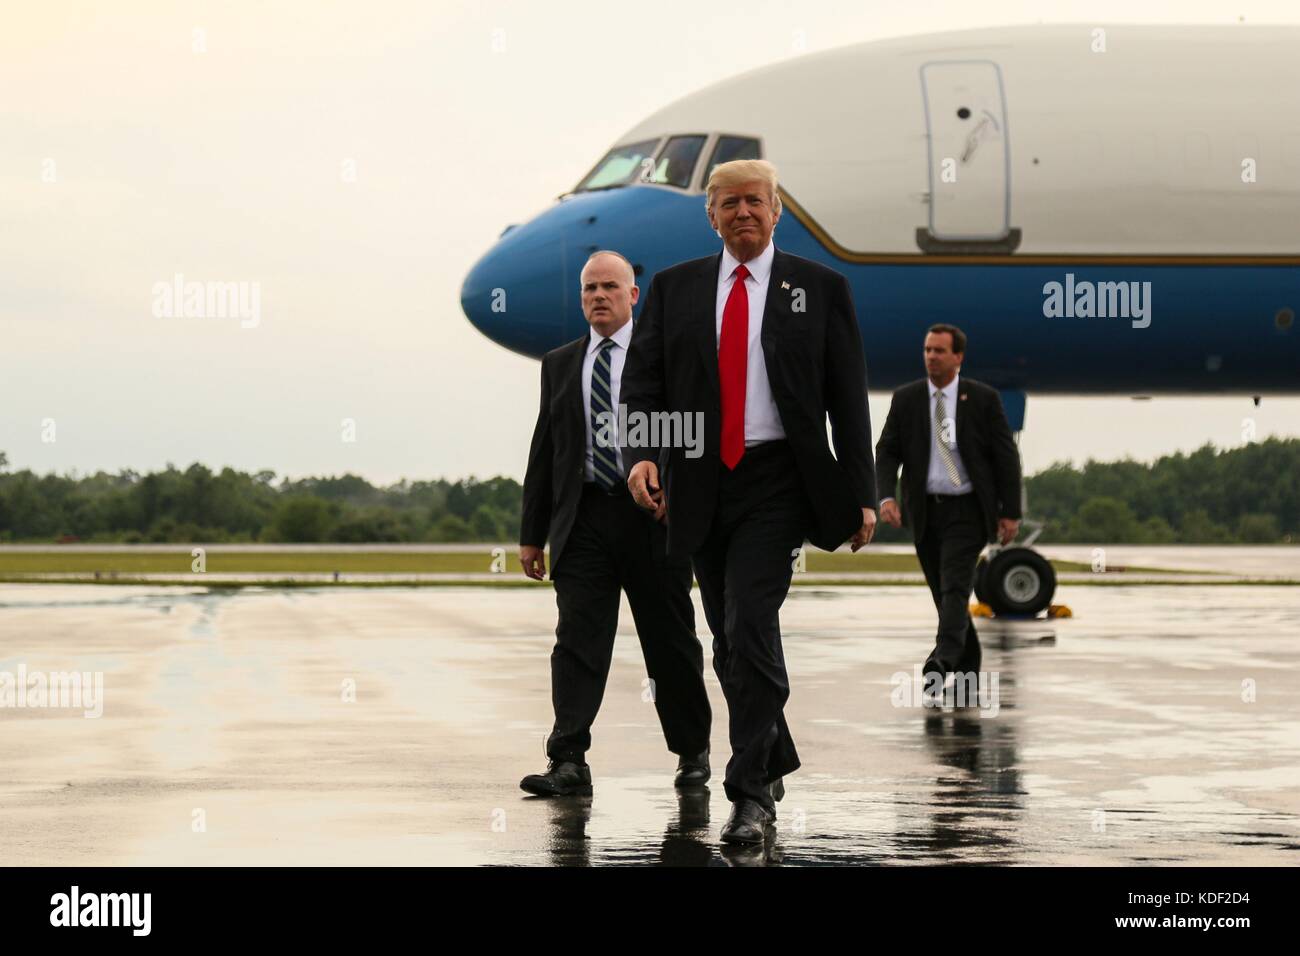 U.S. President Donald Trumps arrives at the Raleigh County Memorial Airport for the Boy Scouts of America National Jamboree July 24, 2017 near Beckley, West Virginia.   (photo by Dustin D. Biven  via Planetpix) Stock Photo